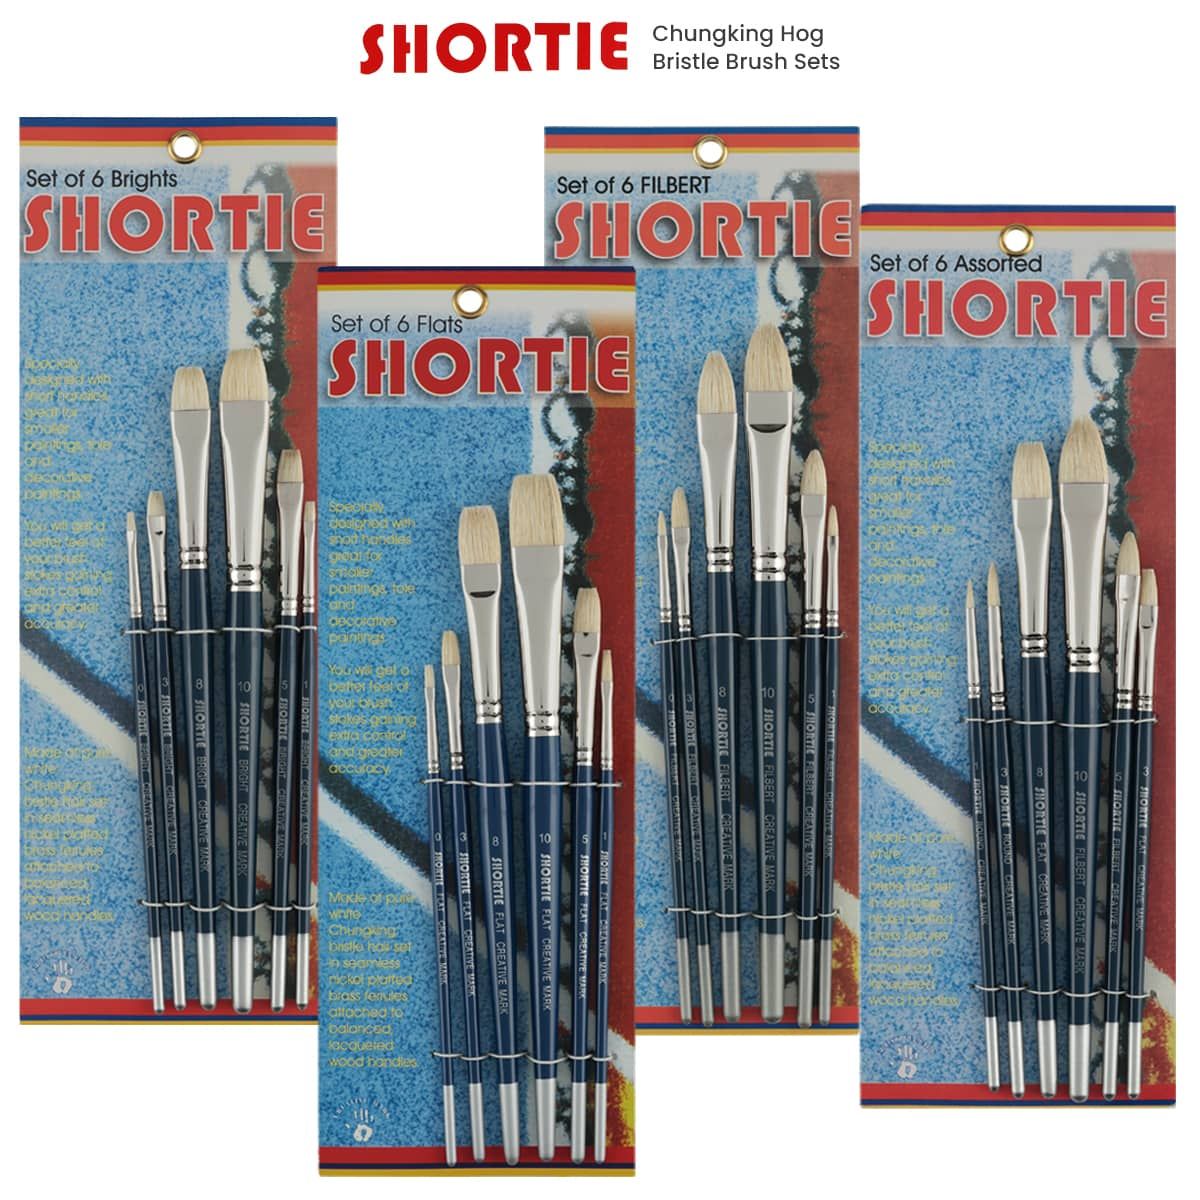 Shortie Bristle Brush Sets are perfect for painting anywhere, anytime!